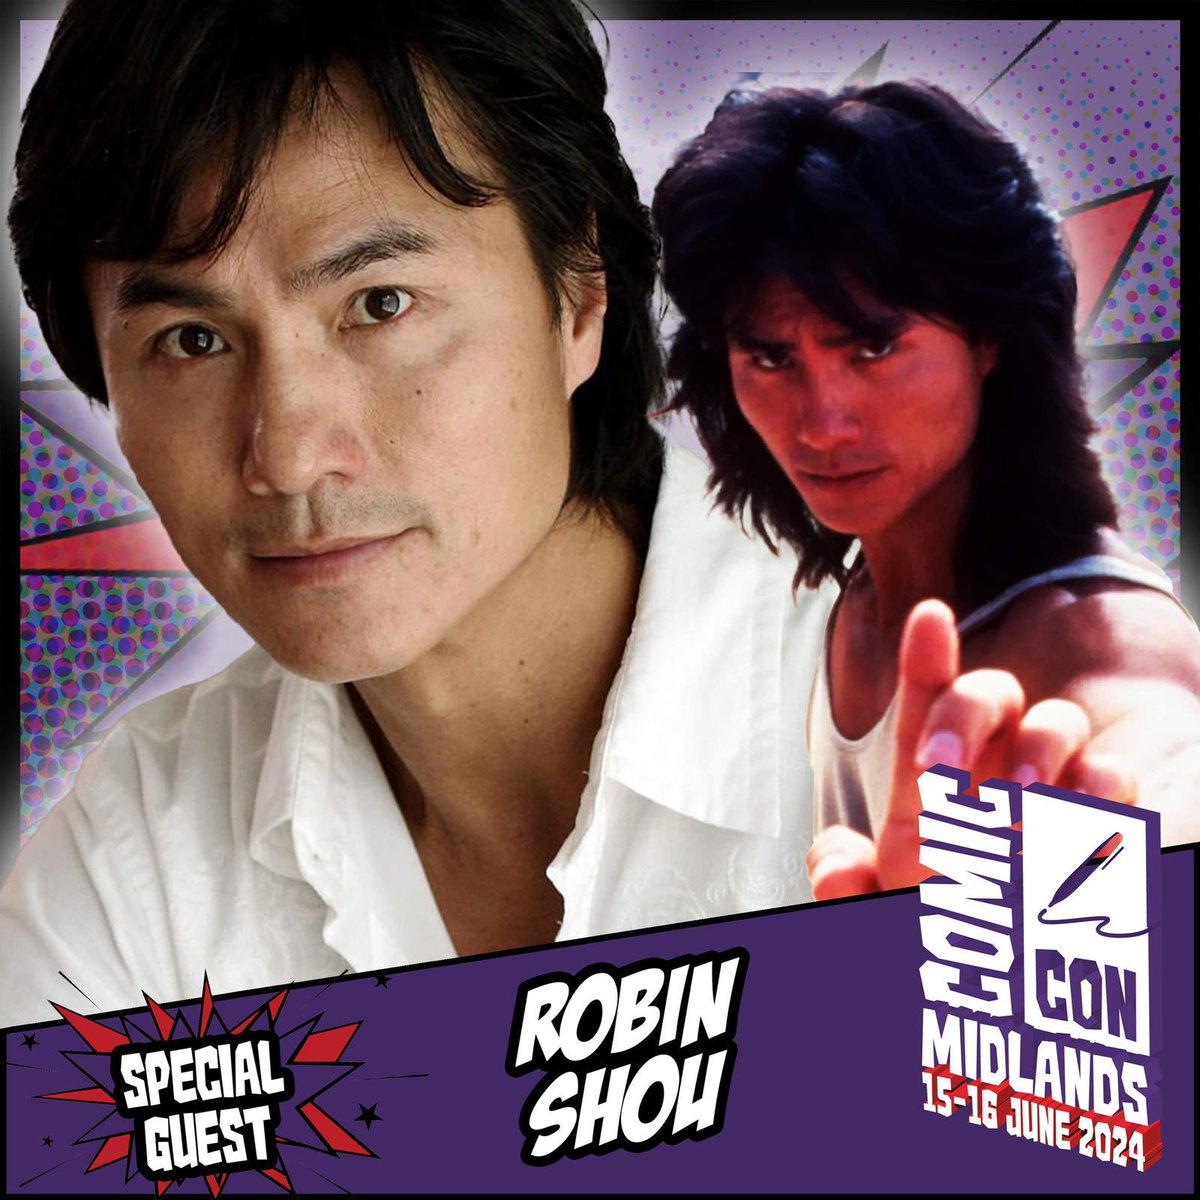 Comic Con Midlands welcomes Robin Shou, known for projects such as Mortal Kombat, Death Race, Pirate Brothers, Black Tiger, and many more. Appearing 15-16 June! Tickets: comicconventionmidlands.co.uk